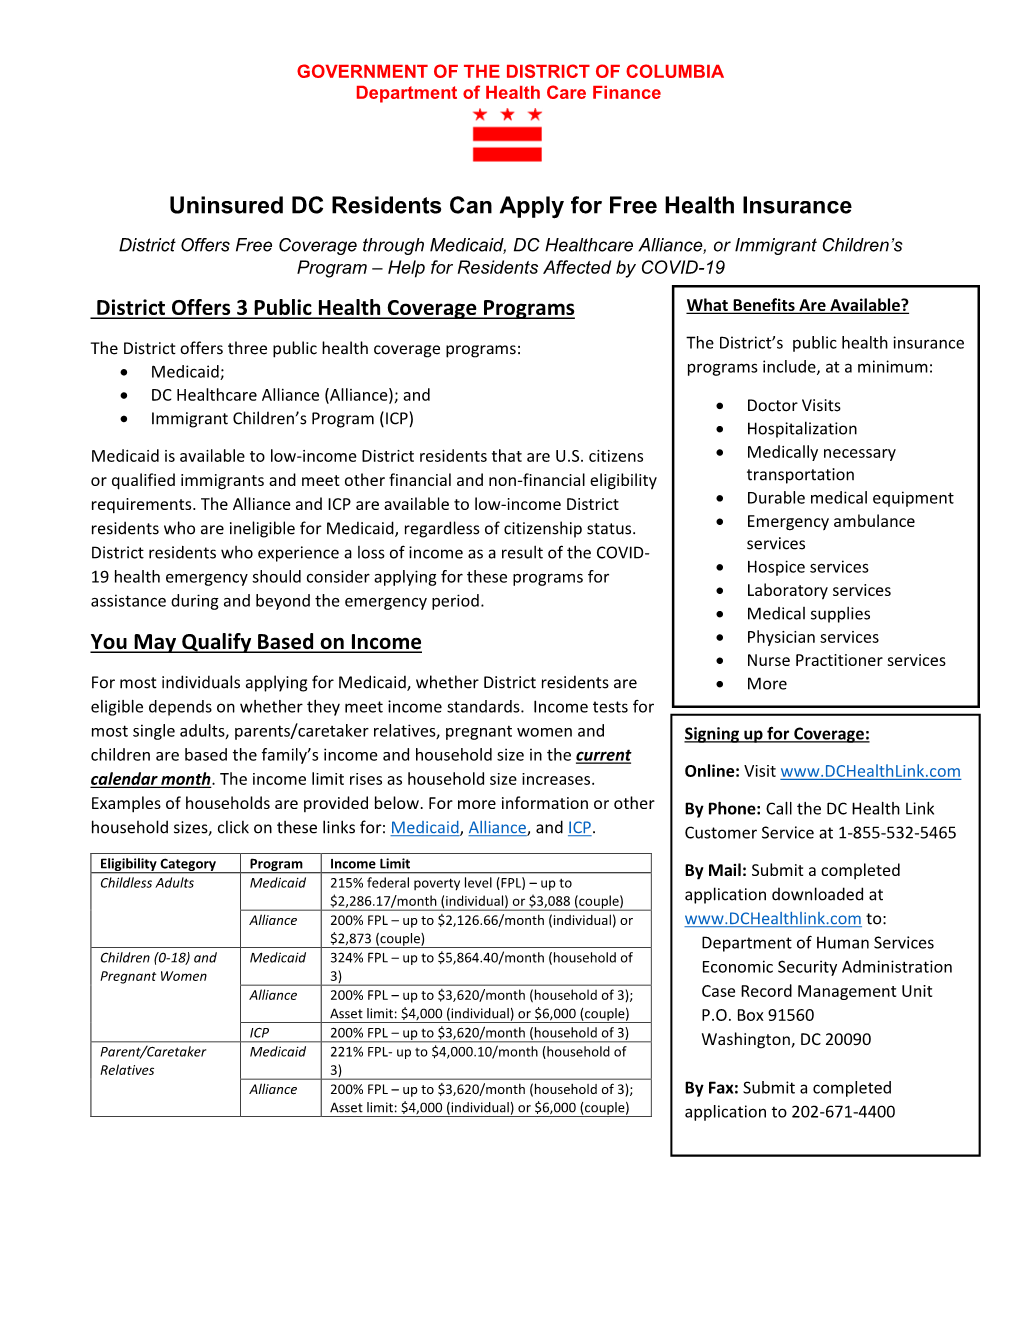 Uninsured DC Residents Can Apply for Free Health Insurance